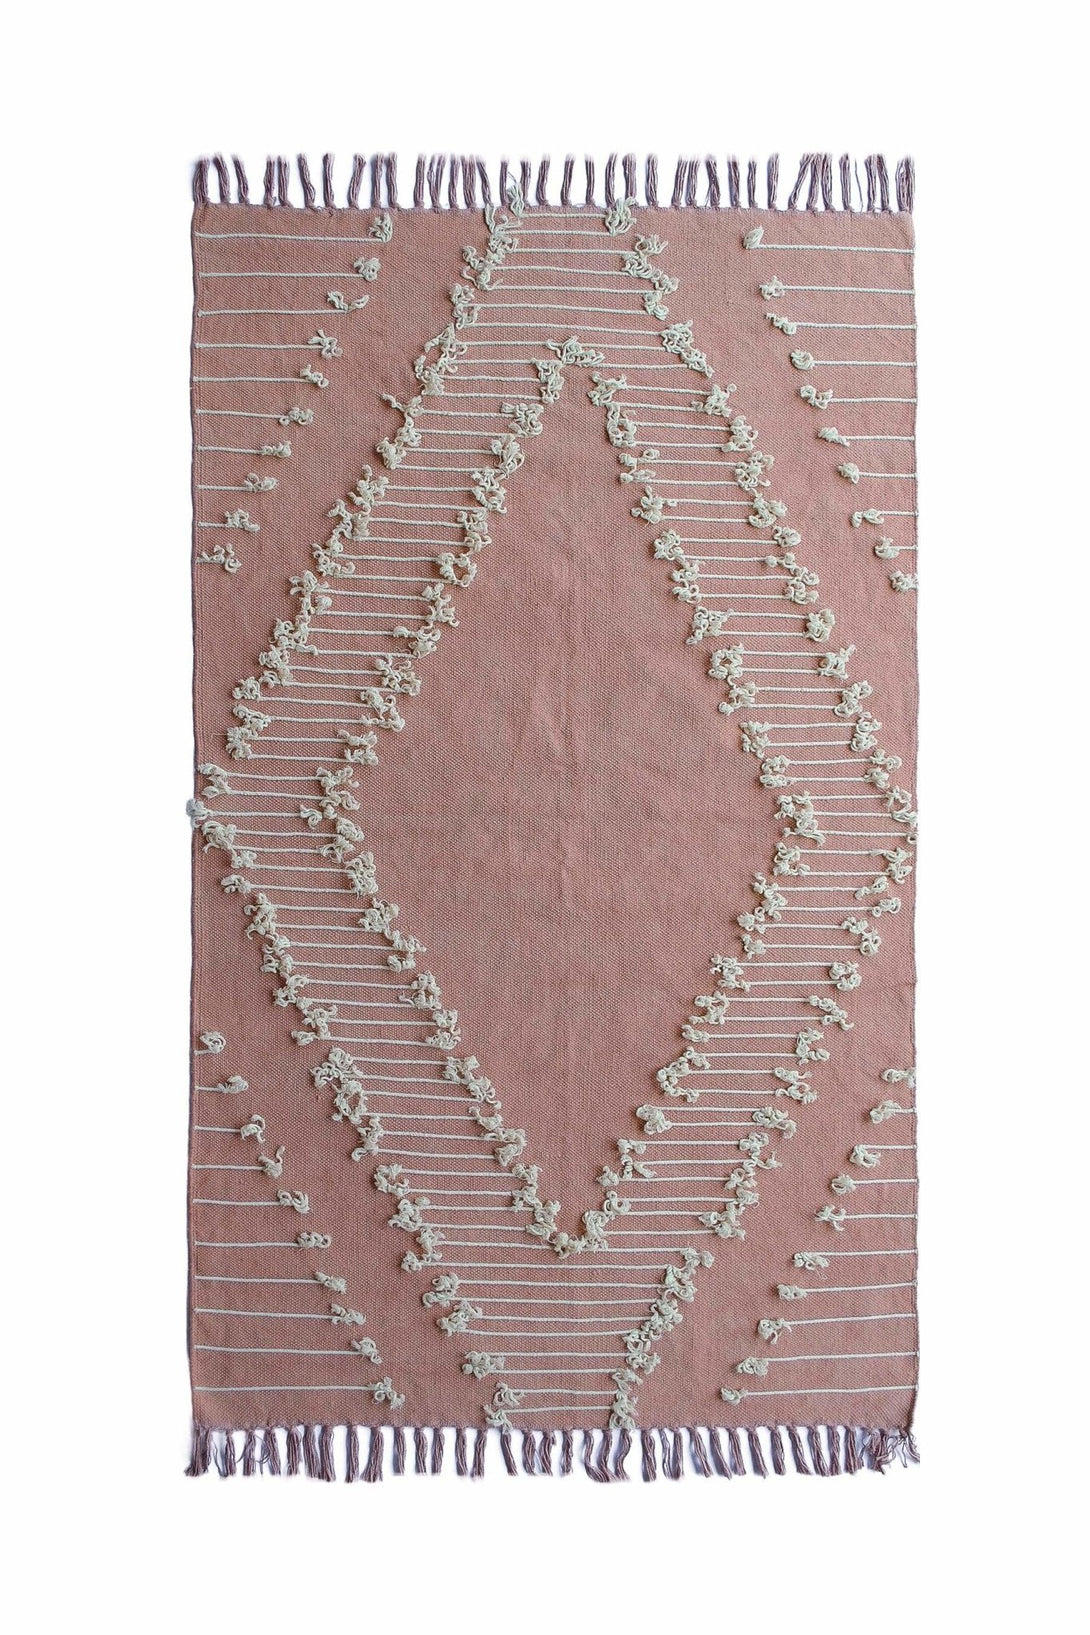 FAIRMONT - OVERDYED HAND EMBROIDERED RUG - LIGHT PINK - ART AVENUE